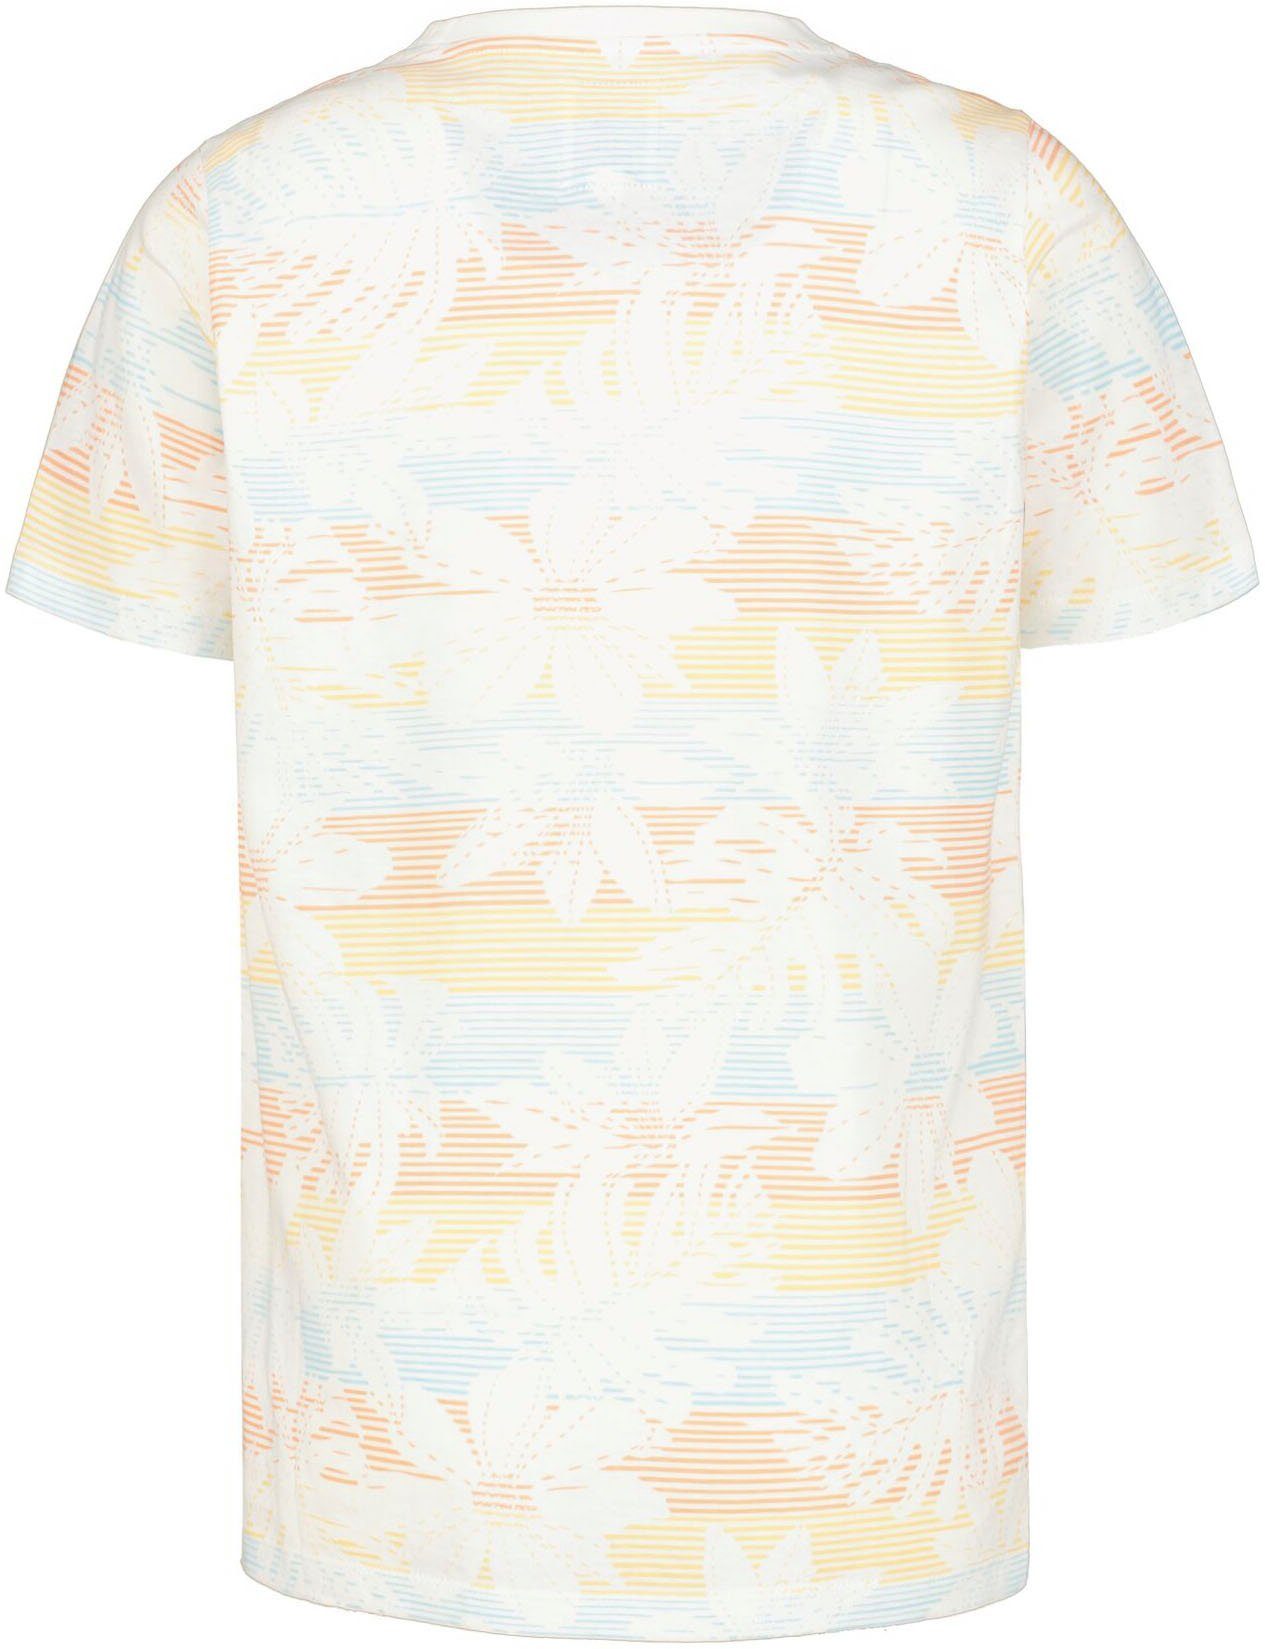 Garcia T-Shirt offwhite BOYS mit floralem Allovermuster, for